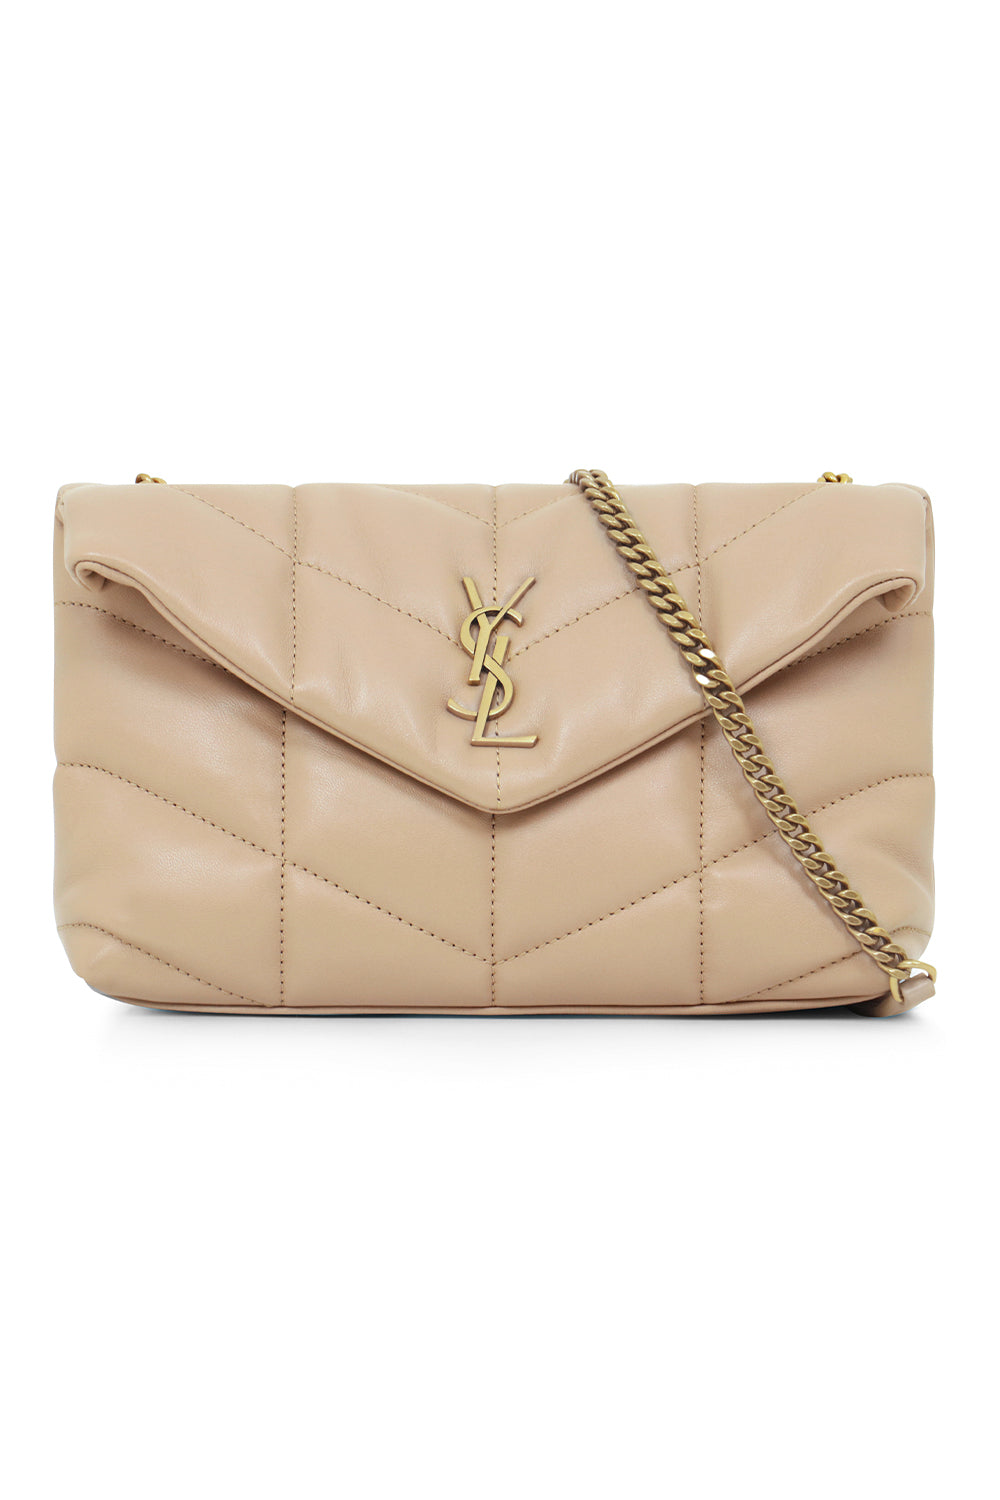 Rate That Bag: YSL LouLou Puffer Bag — What I'm On Today